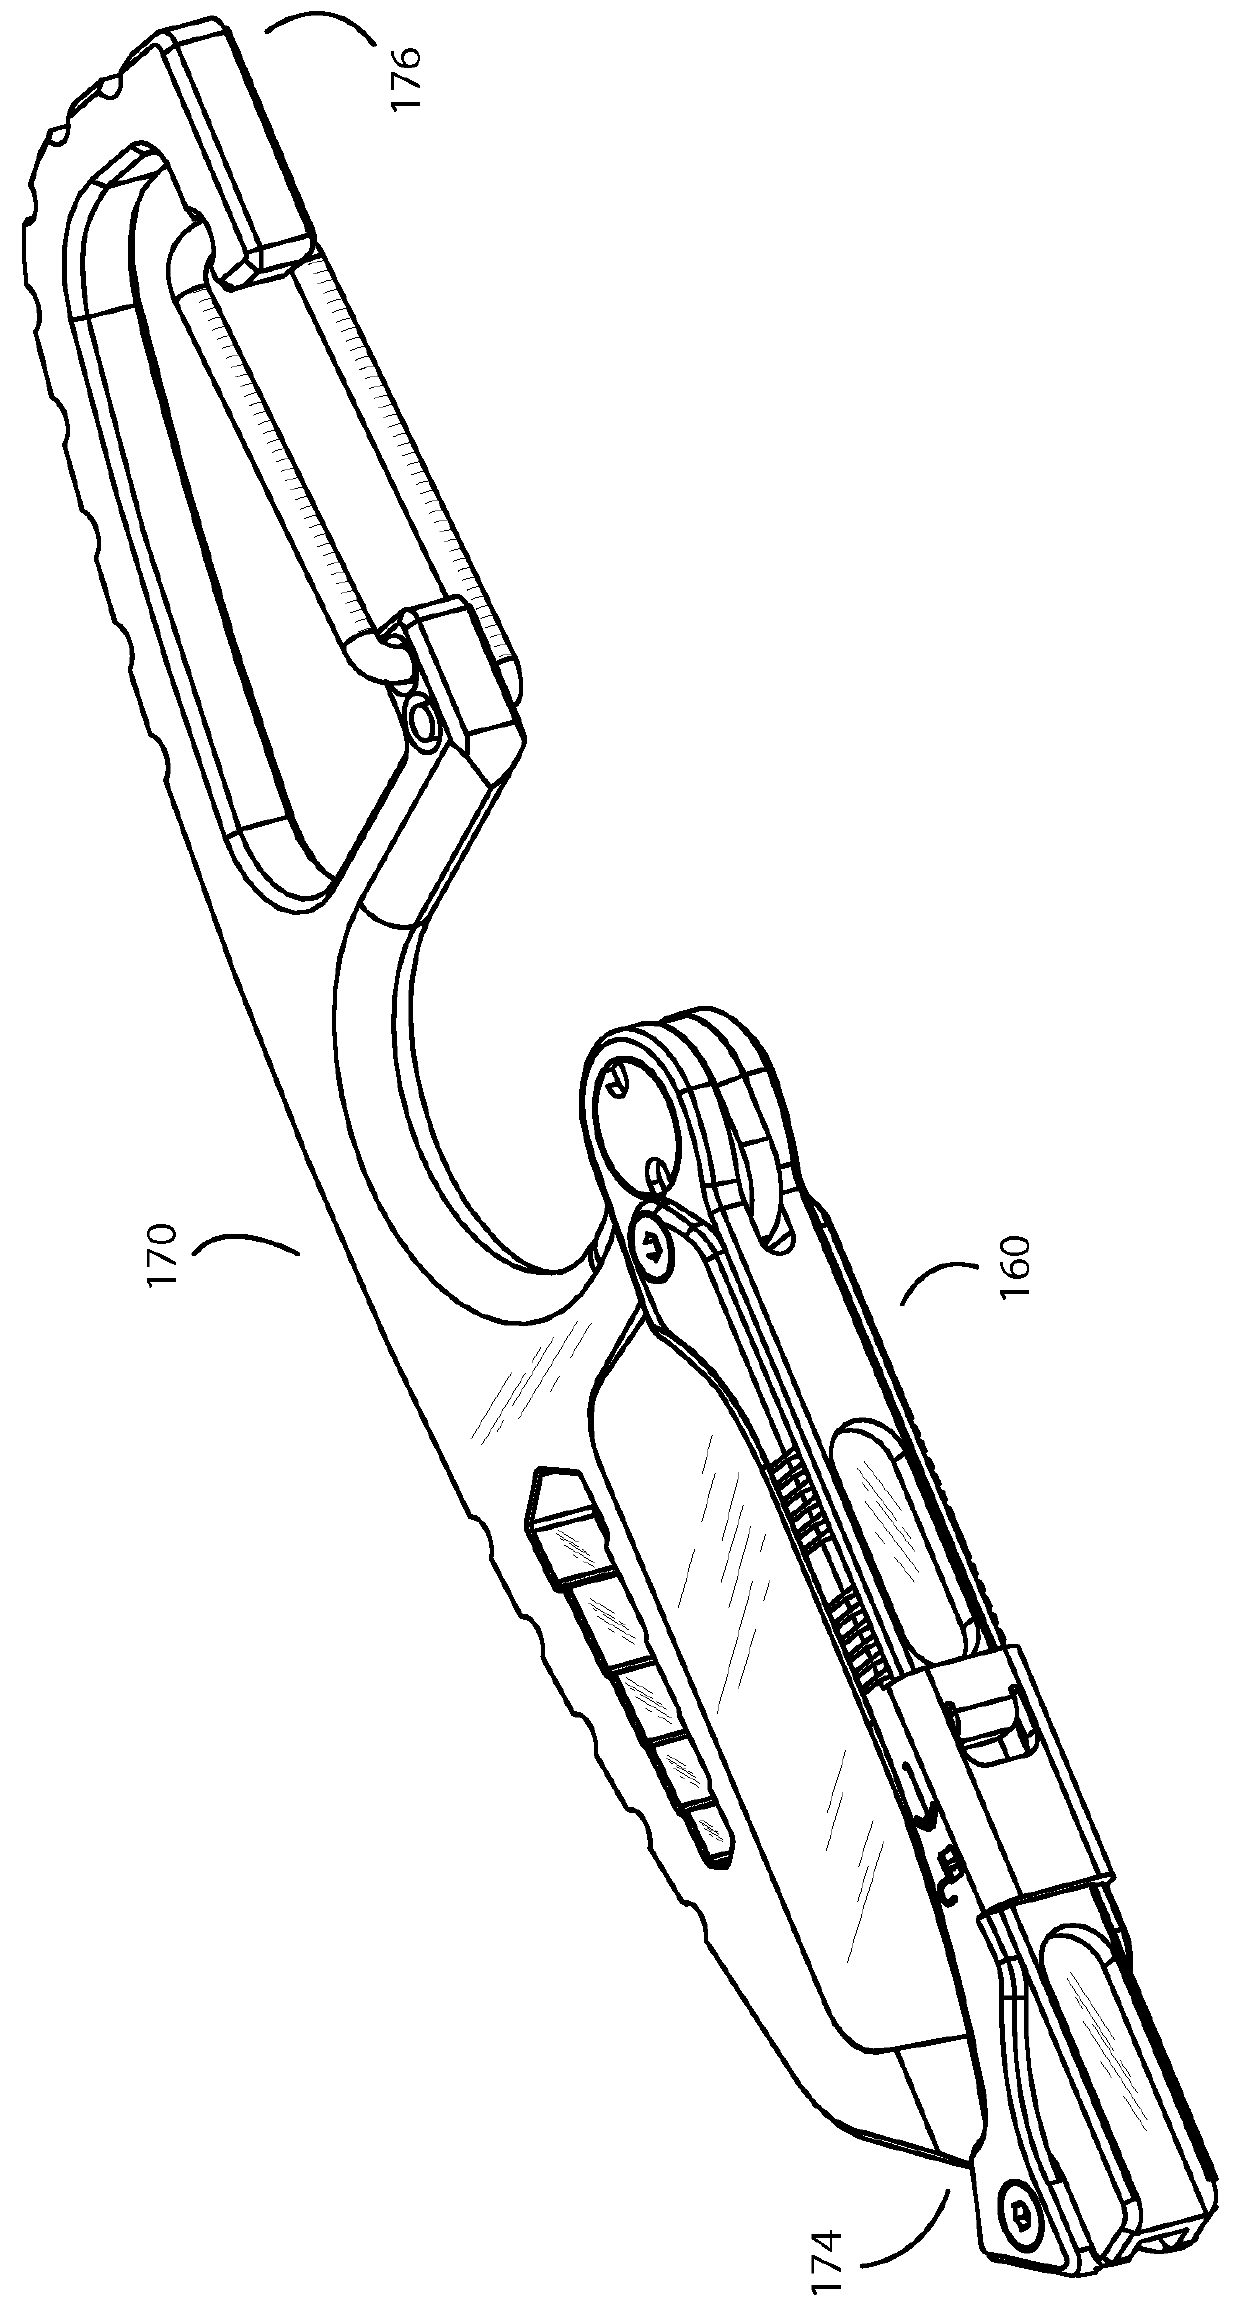 Survival knife with integrated moveable guard